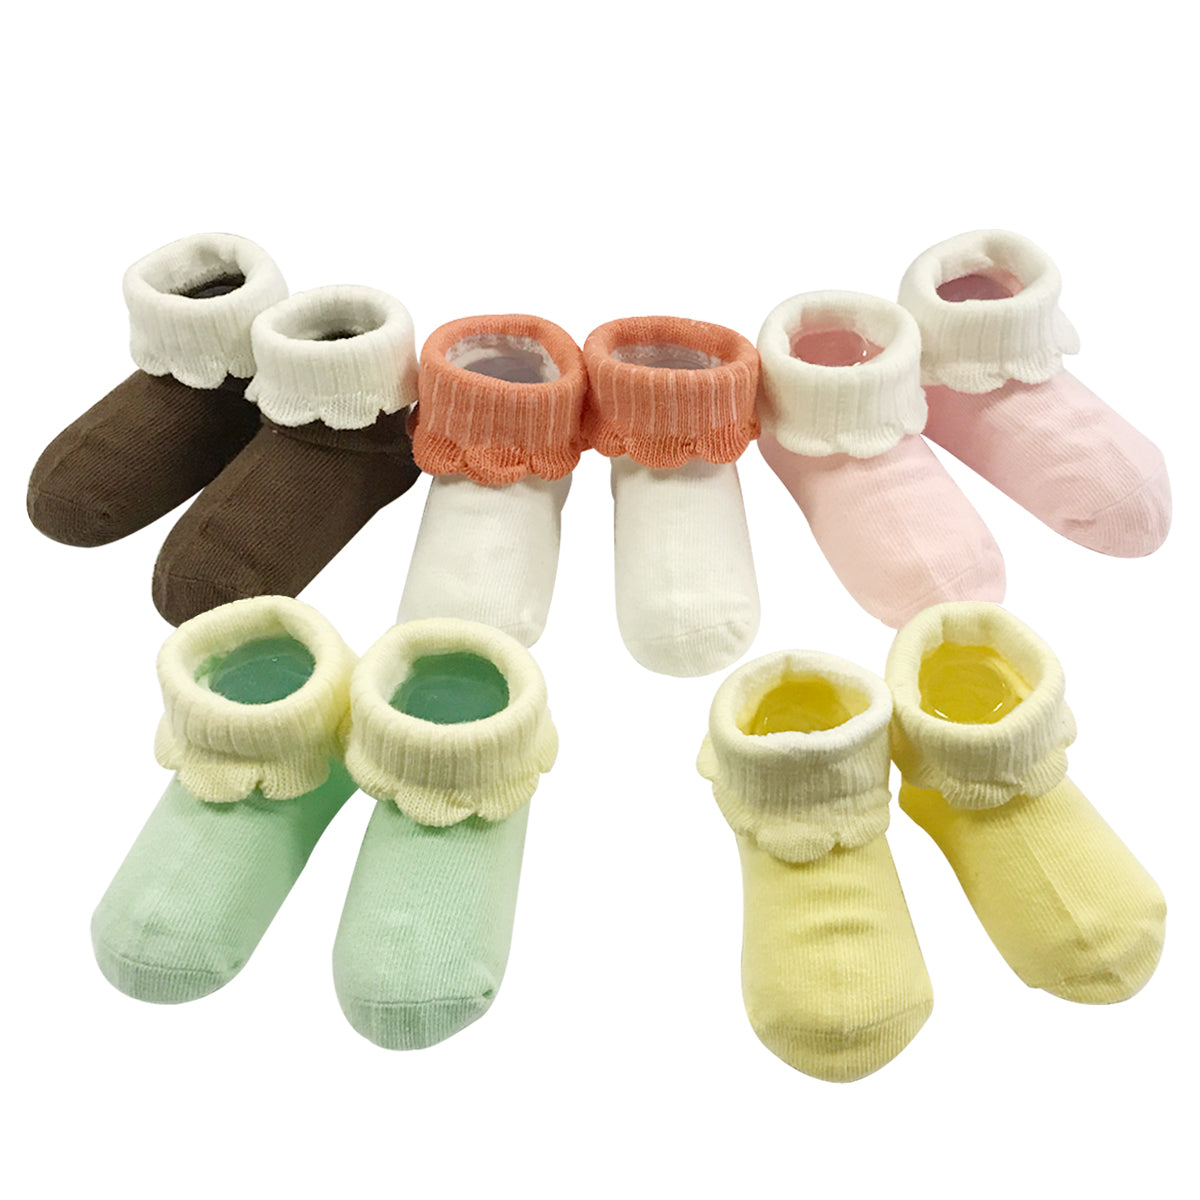 Wrapables Macaroon Color Baby Socks (Set of 5)